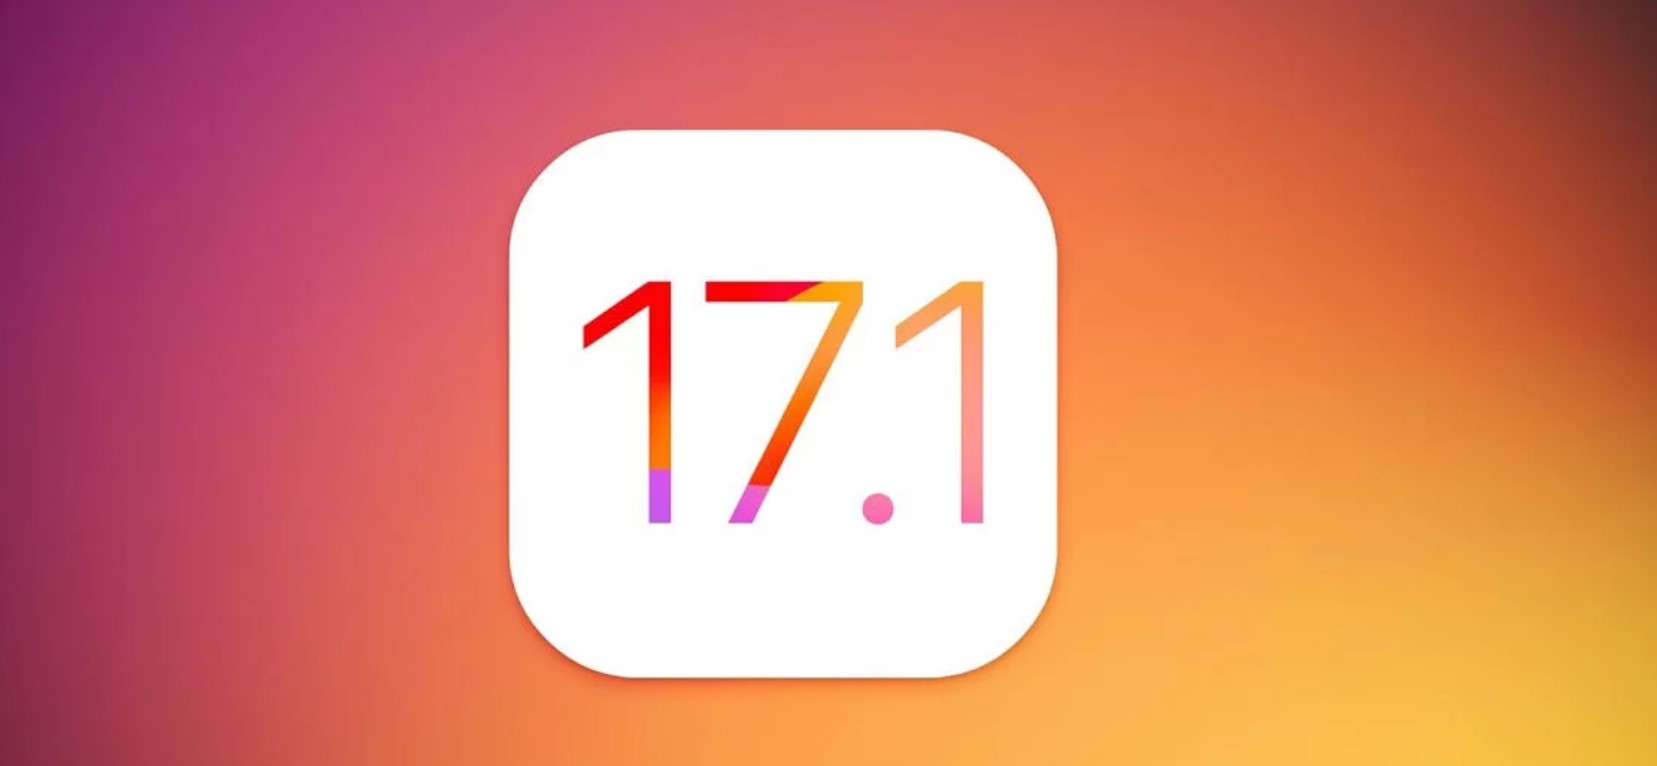 iOS 17.1 Update Appeared! Is There Any Innovation?